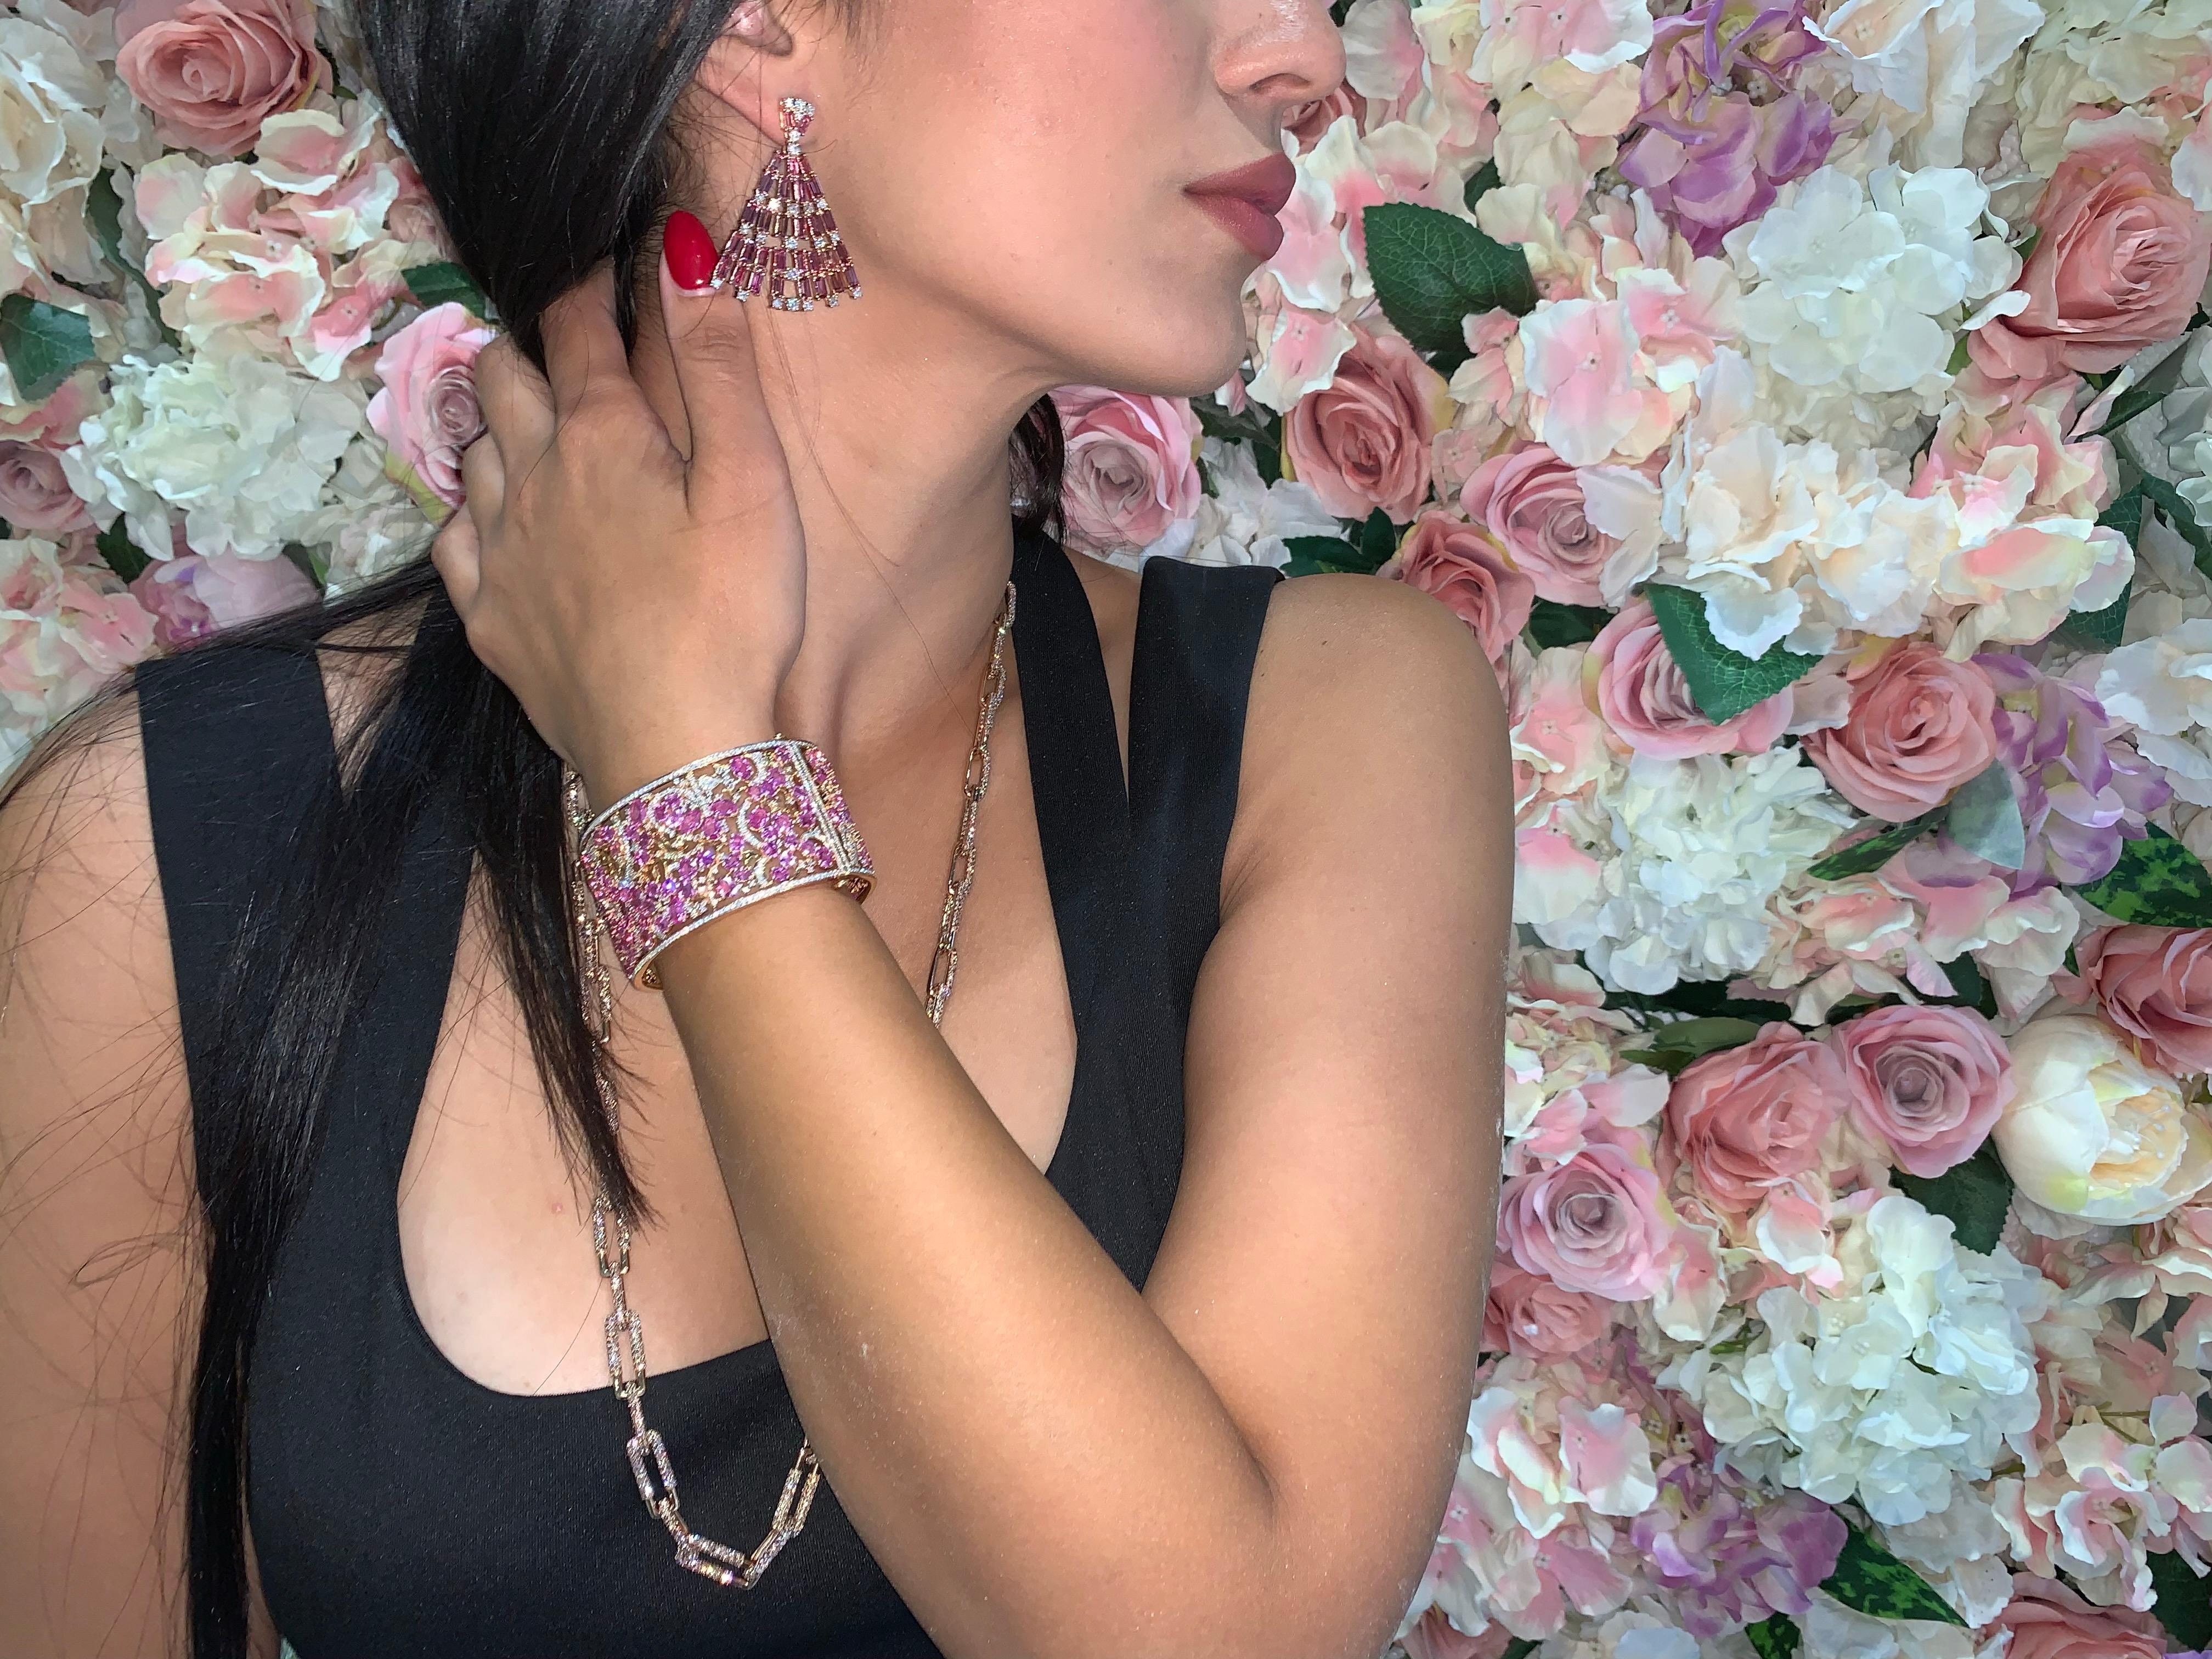 Sunita Nahata presents an exclusive designer bracelet adorned with pink sapphires and diamonds. The gemstones are set to elegantly display pink flowers, while the detailed gold work show the supporting ferns. This piece is truly a showstopper, and